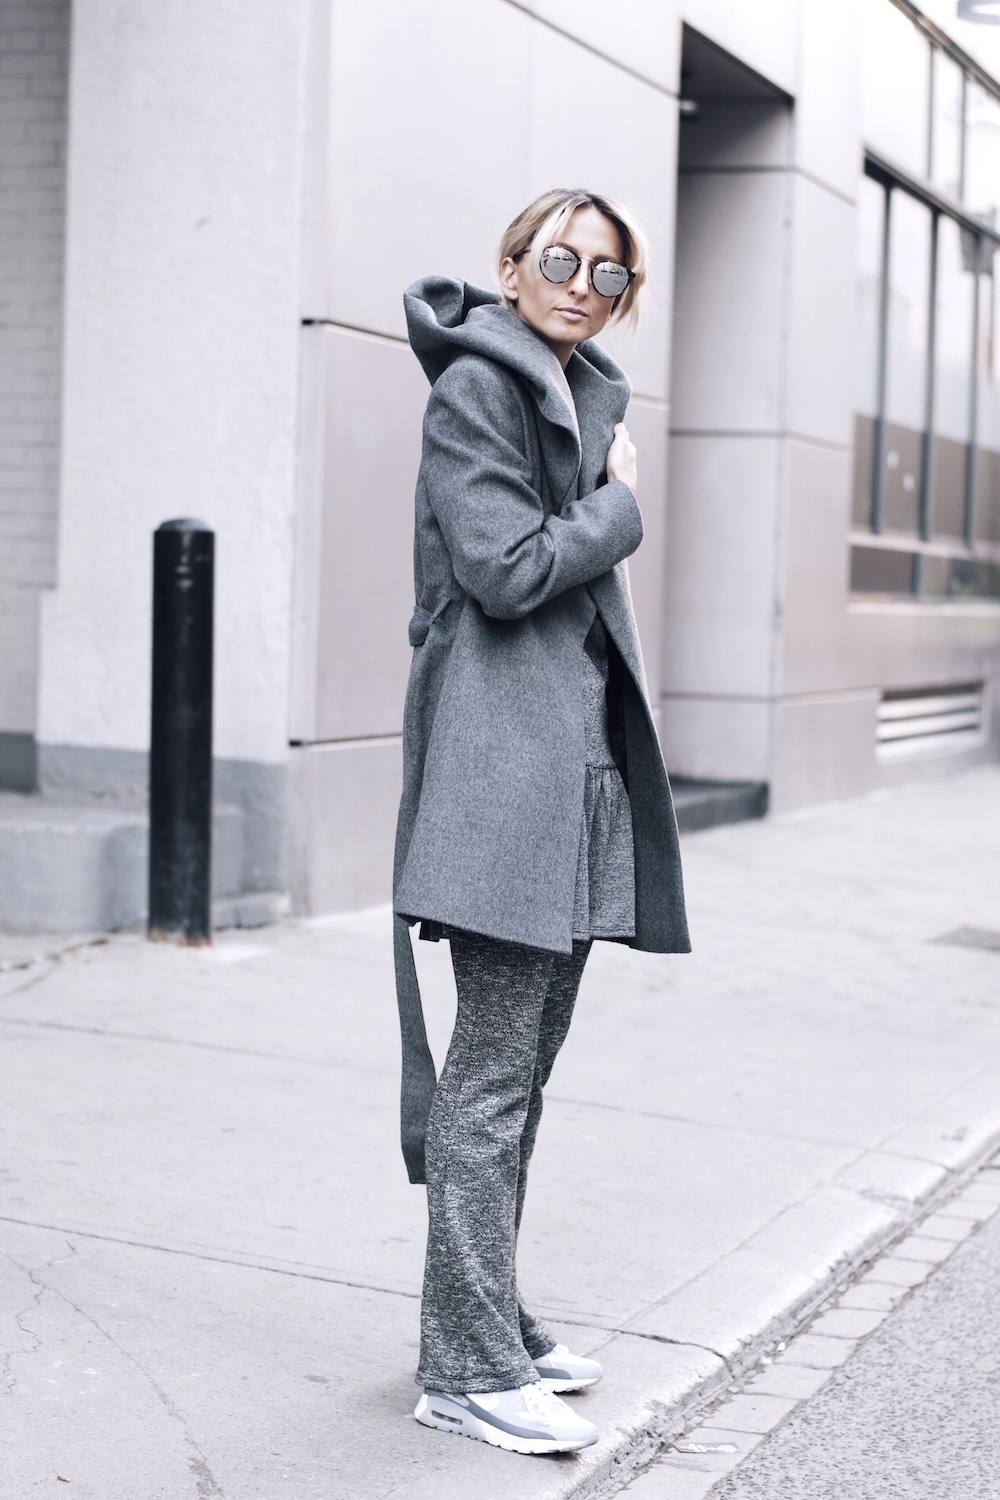 All grey outift monochrome street style 09